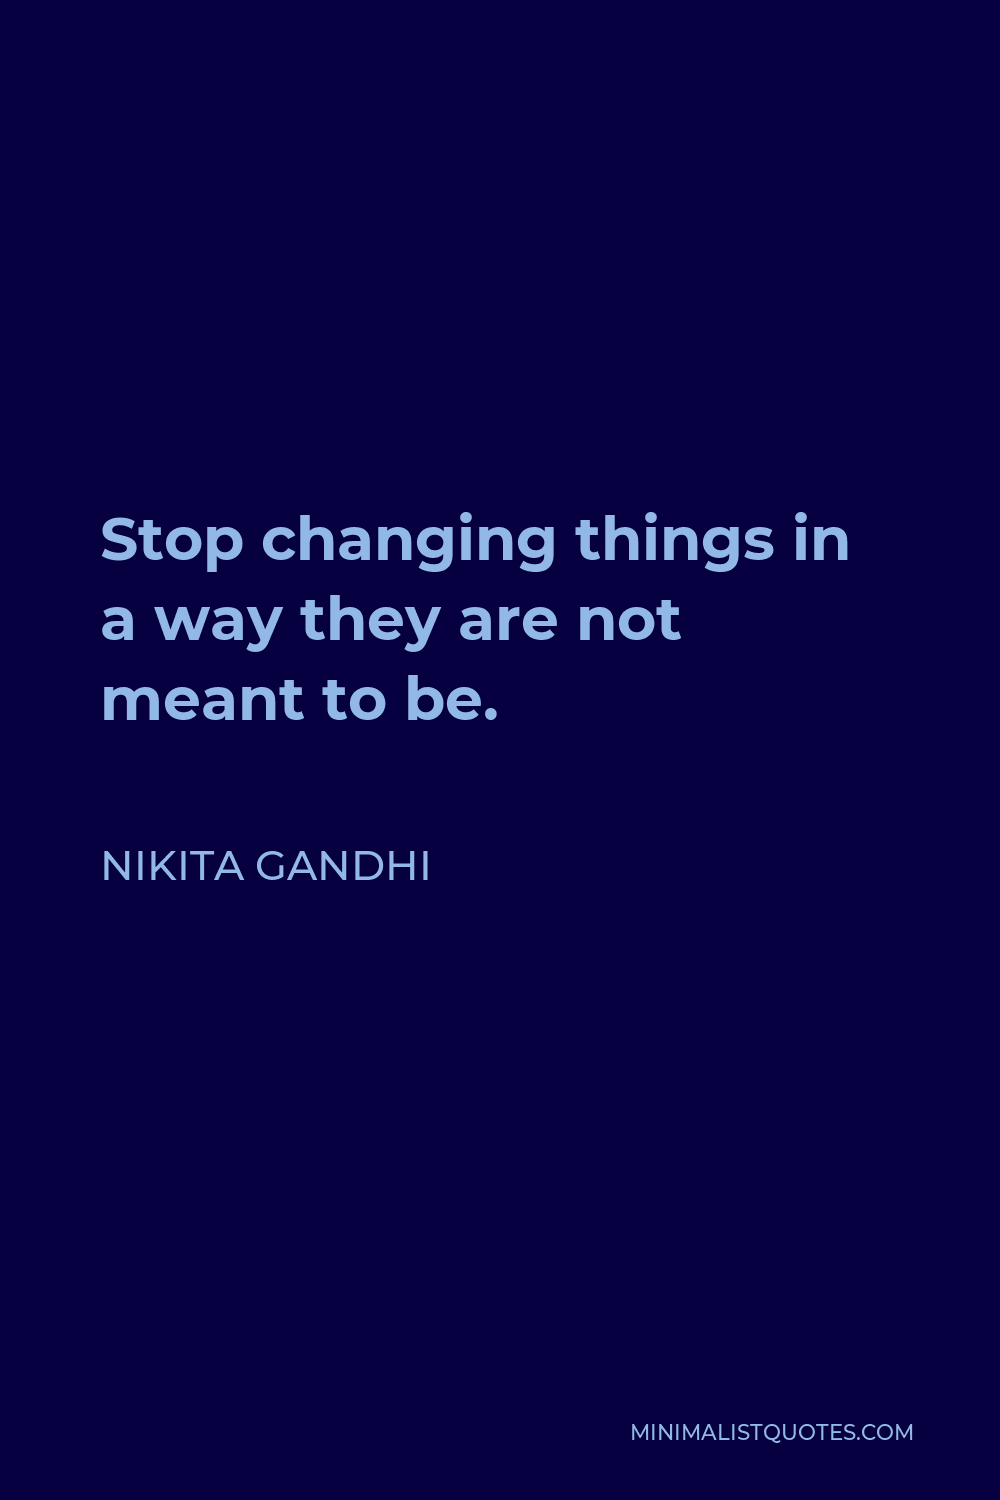 Nikita Gandhi Quote - Stop changing things in a way they are not meant to be.